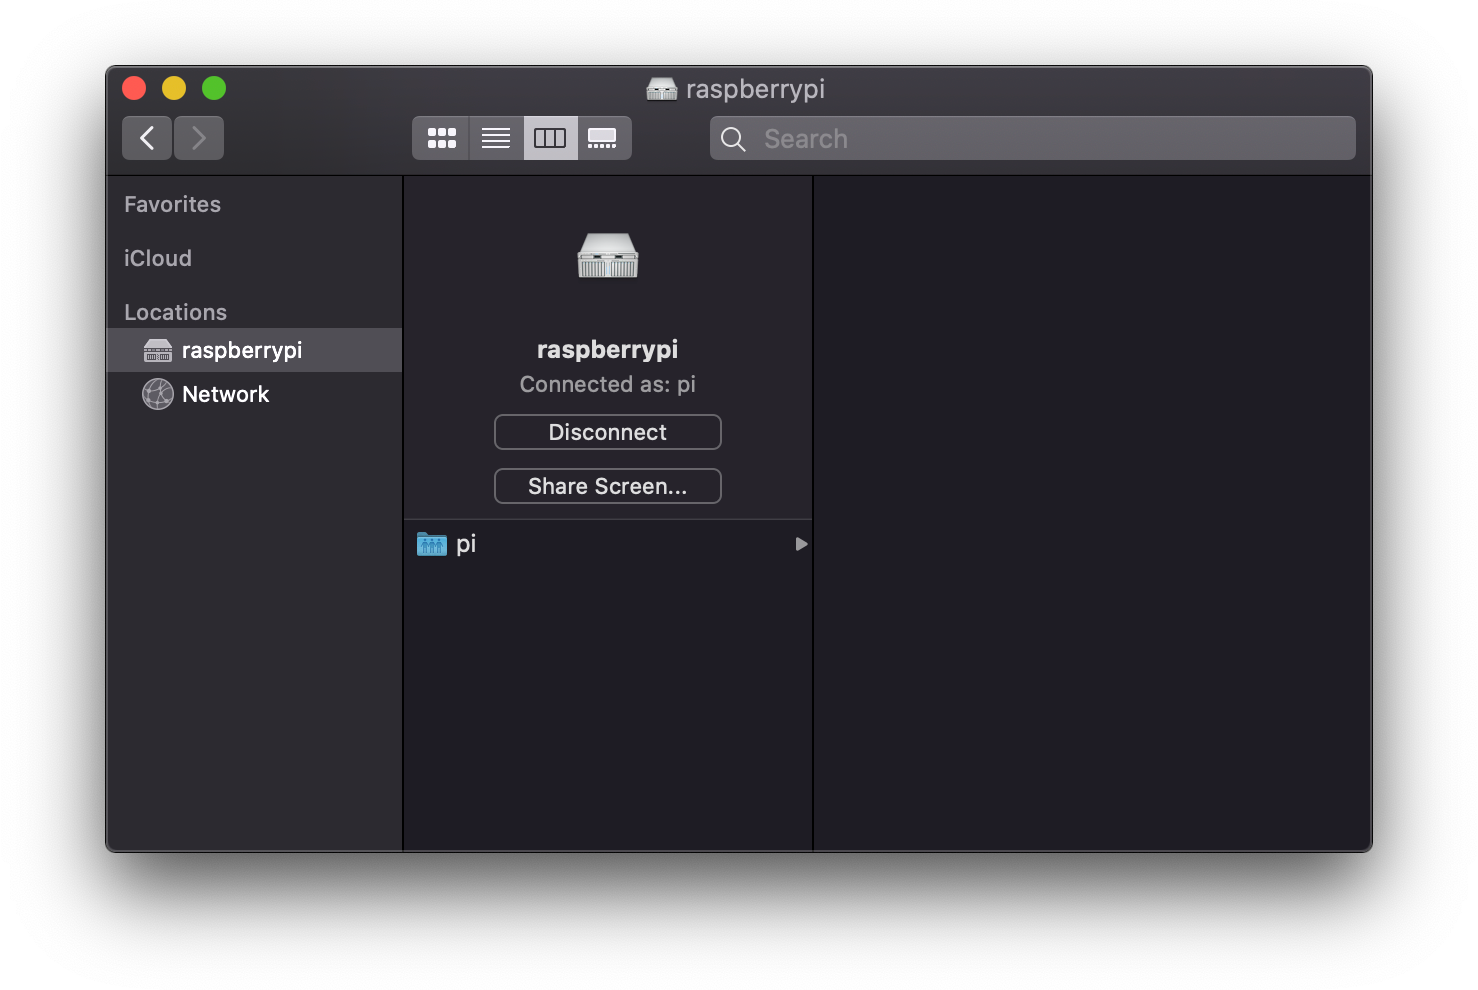 Raspberry Pi fully integrated in macOS Finder